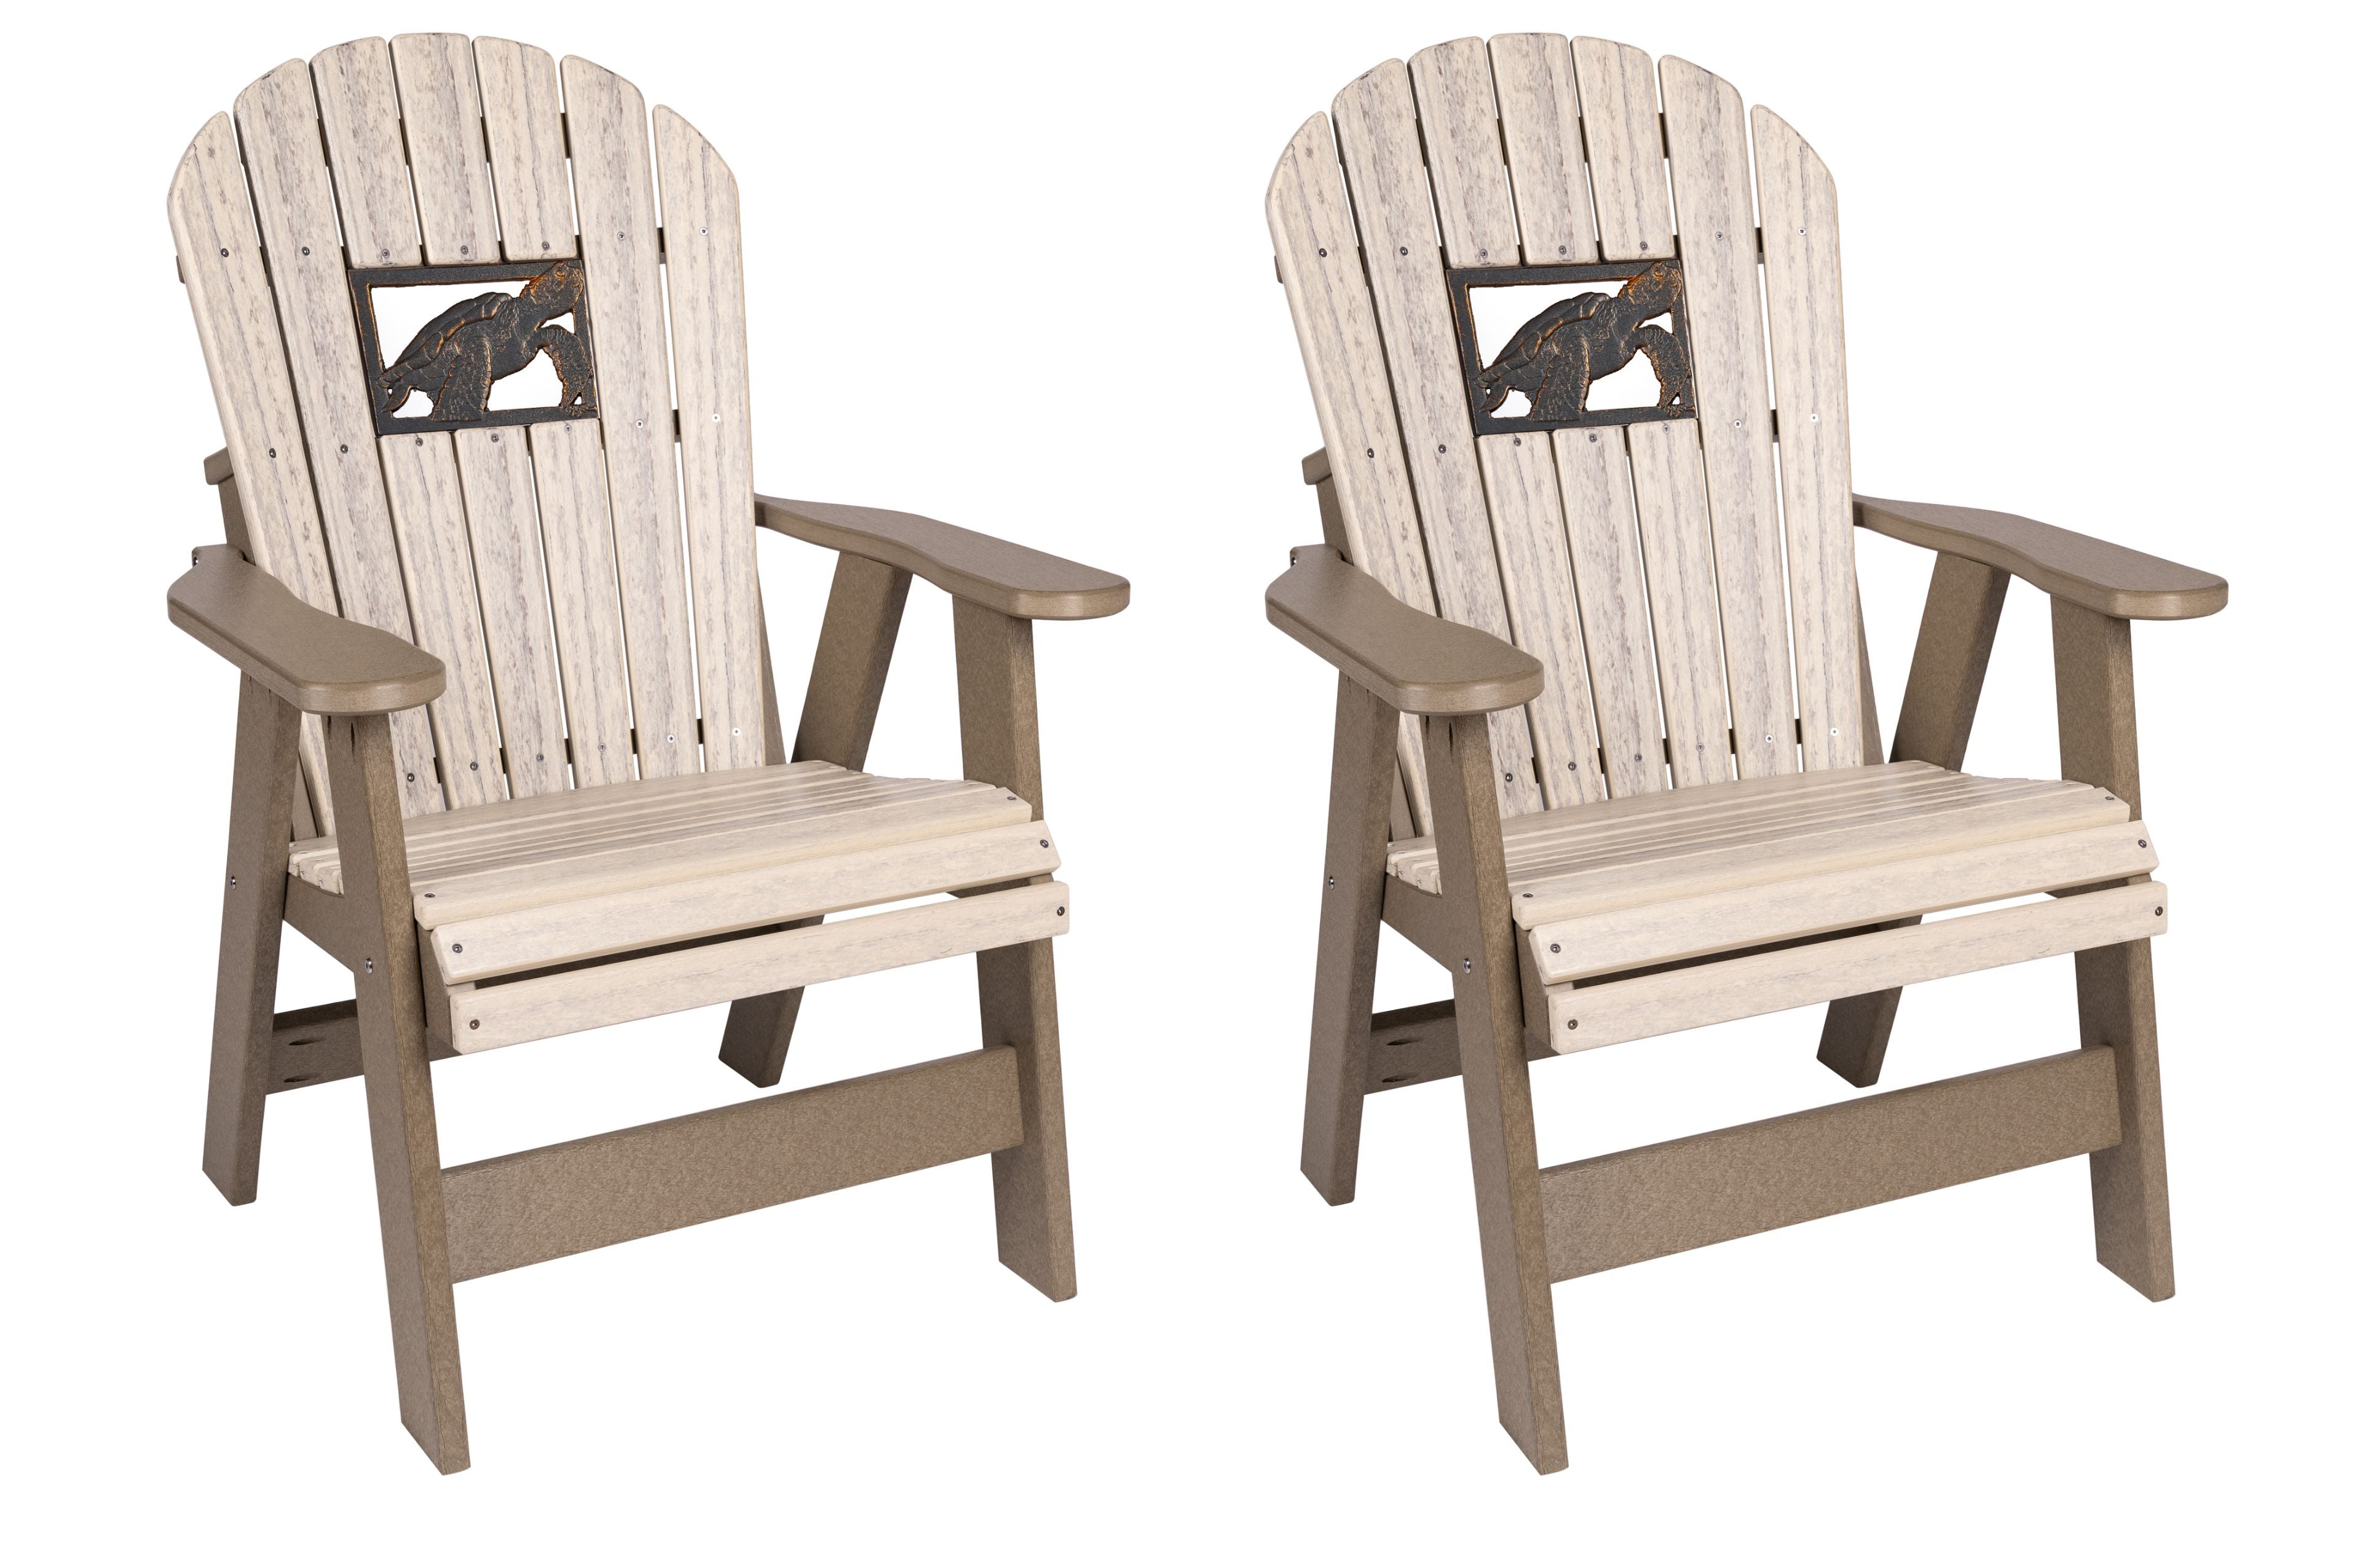 Patio Chairs with Sea Turtle Insert (set of 2)